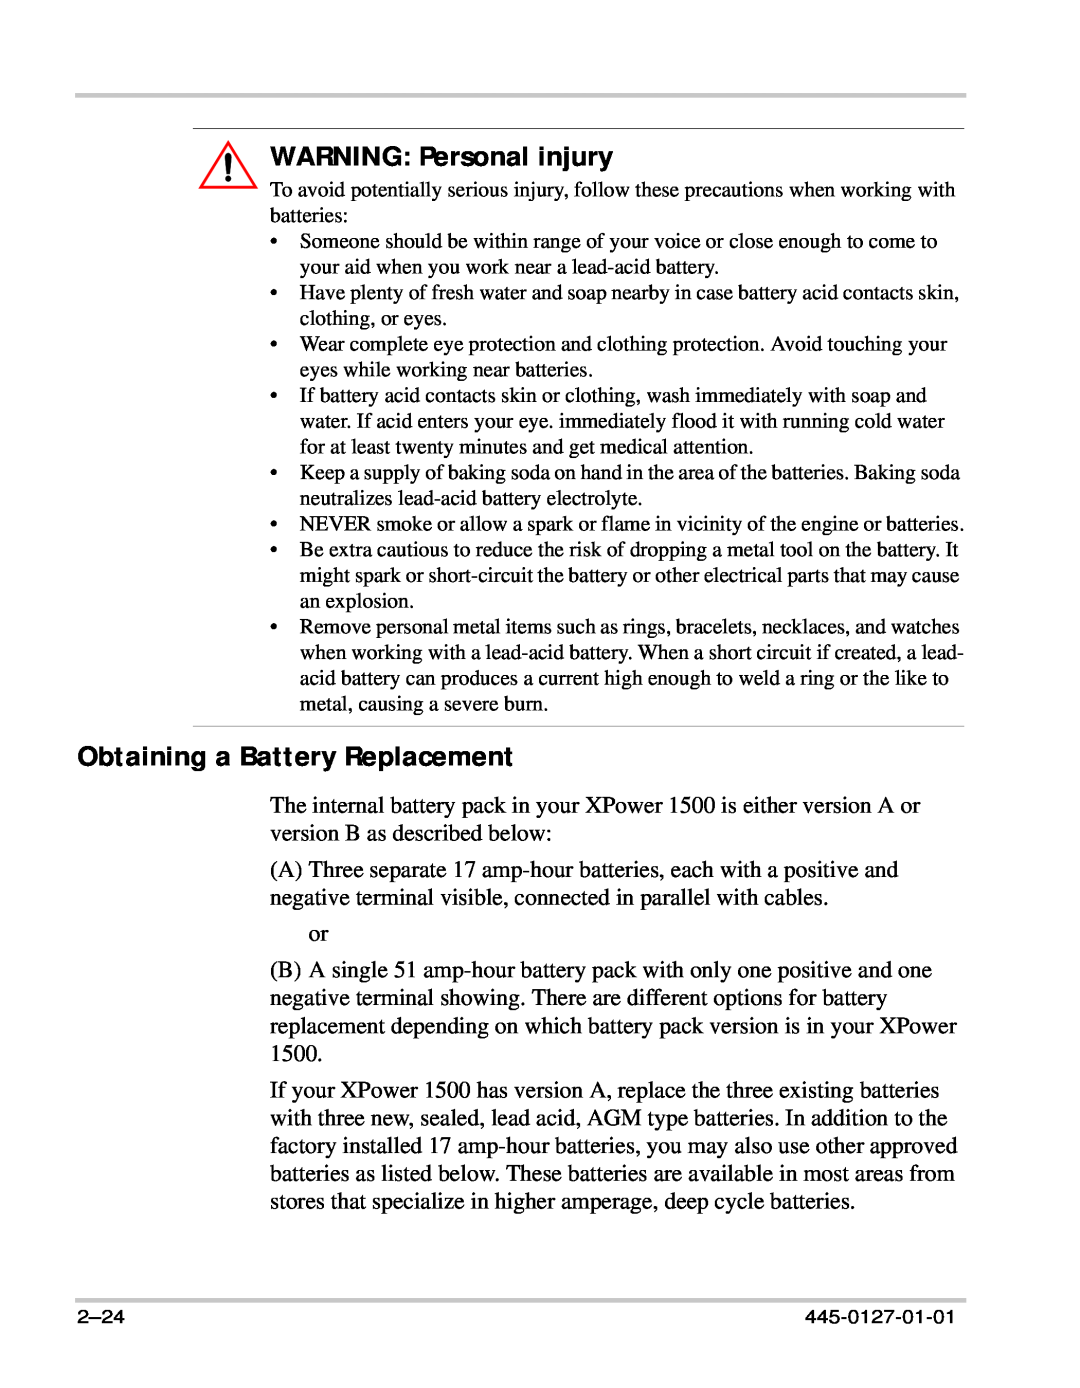 Xantrex Technology 1500 manual Obtaining a Battery Replacement, WARNING Personal injury 